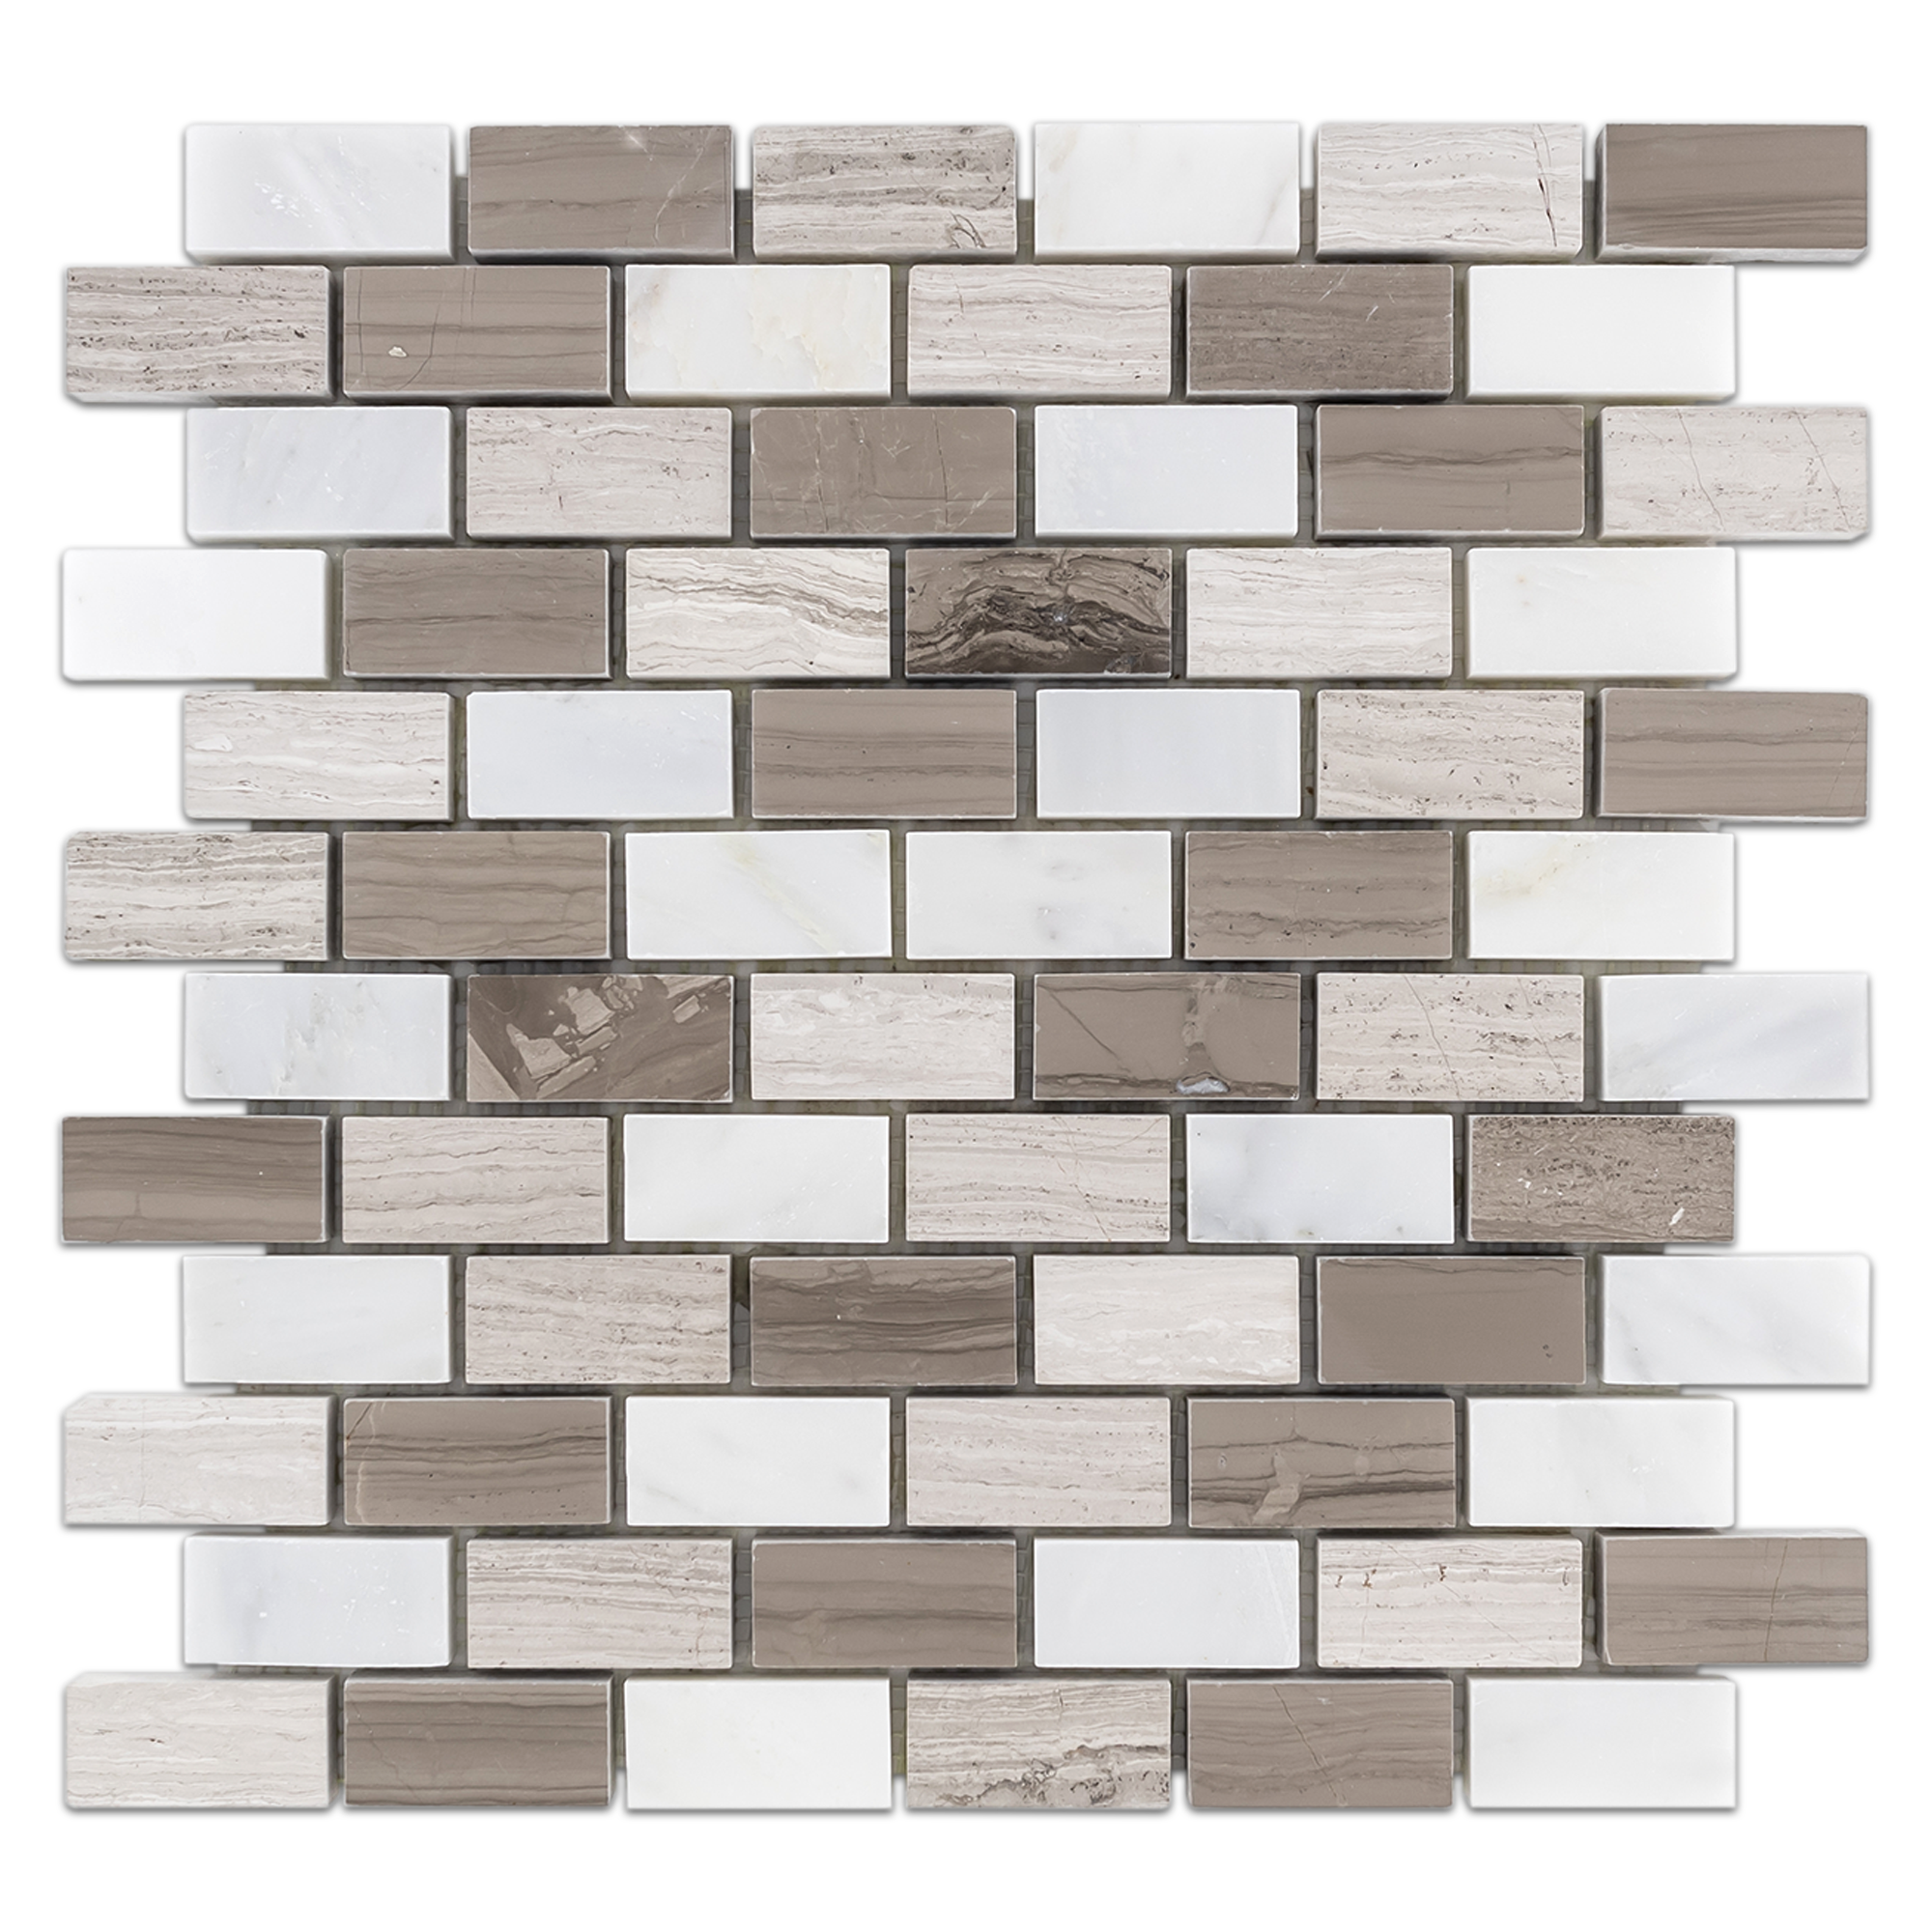 Elon Pearl White Beachwood Driftwood Marble Stone Blend Staggered Joint Field Mosaic 12x12x0.375 Honed AM6300H Surface Group International Product